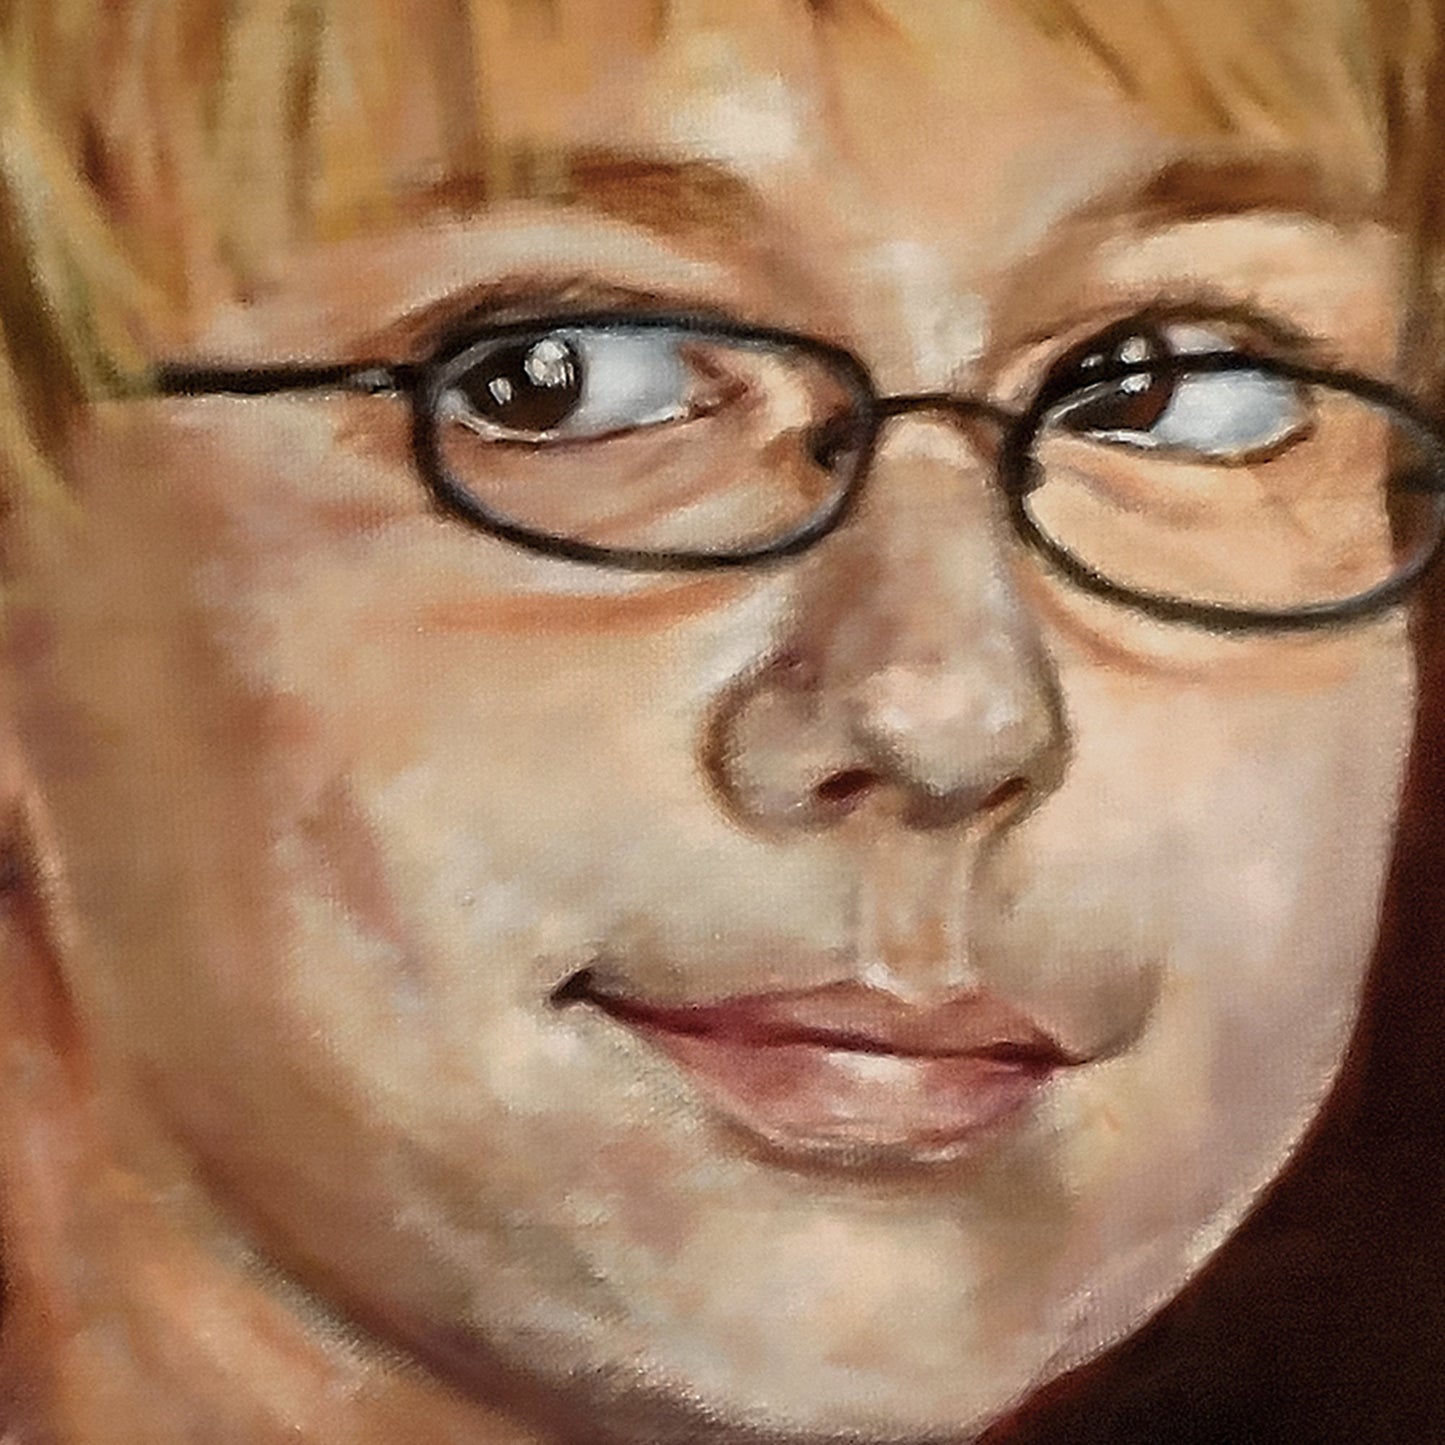 Custom Portrait Painting From Photos, Oil Portrait Painting, Hand Painted, Art Commission